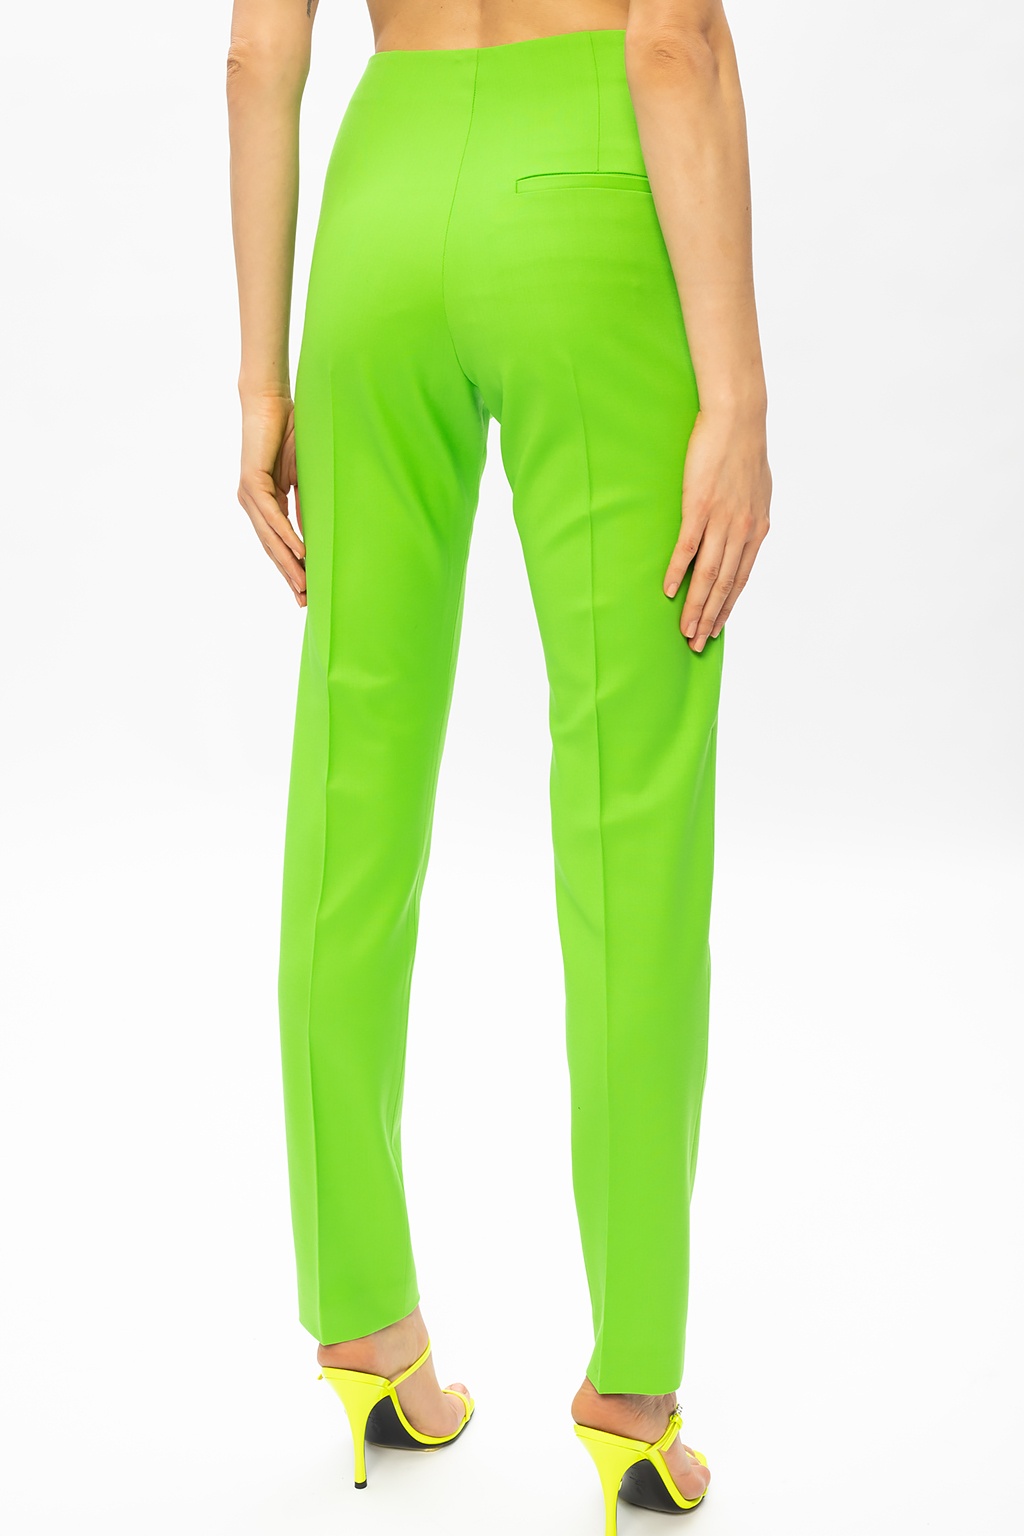 The Attico High-waisted pleat-front trousers